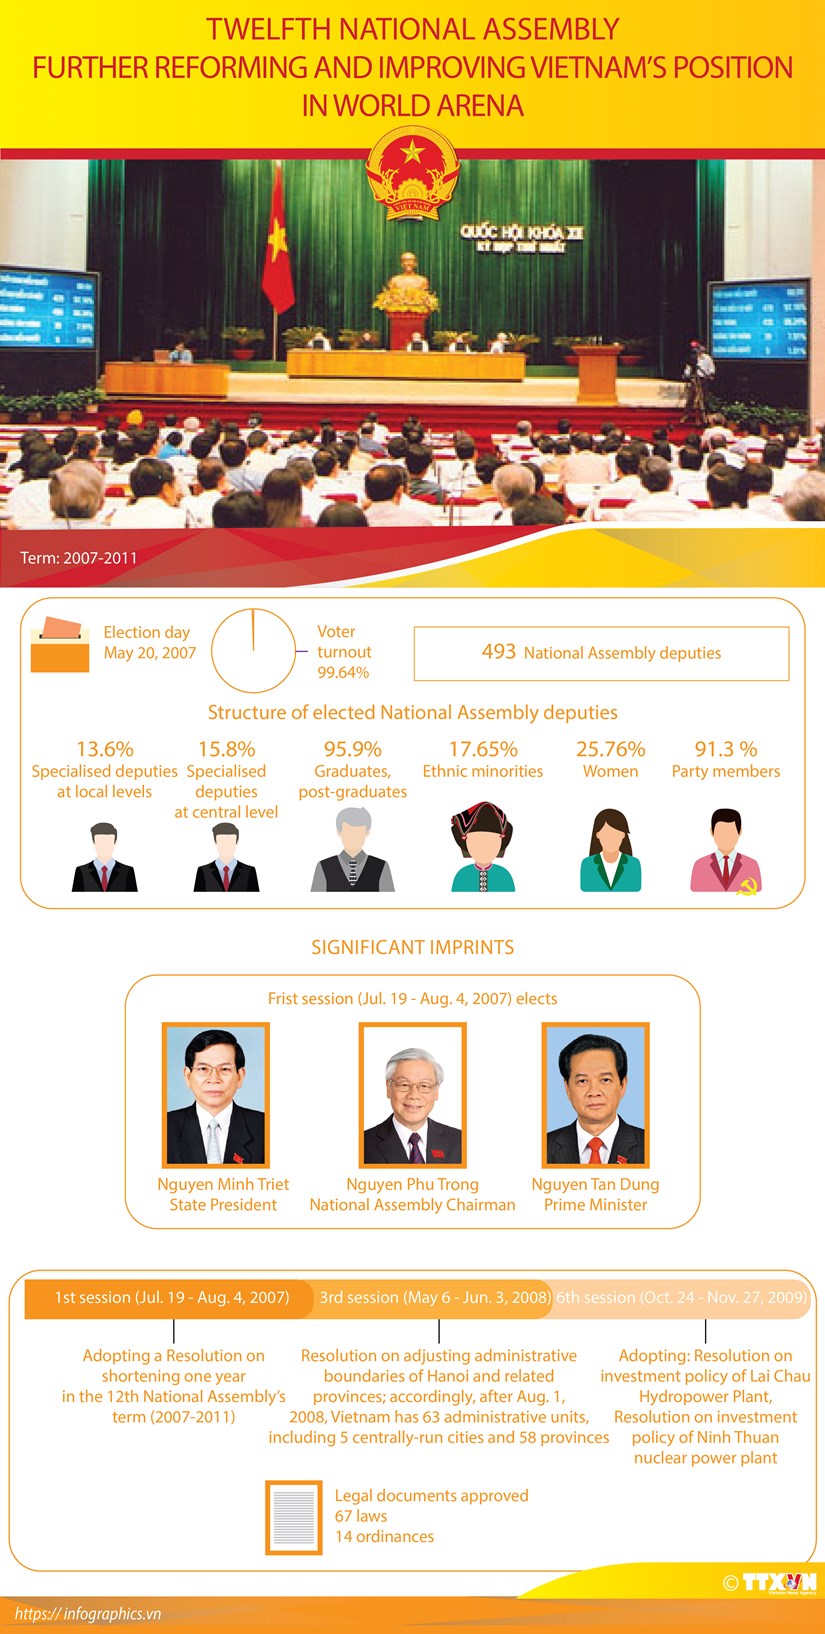 Twelfth National Assembly: Further reforming and improving Vietnam's position in world arena hinh anh 1